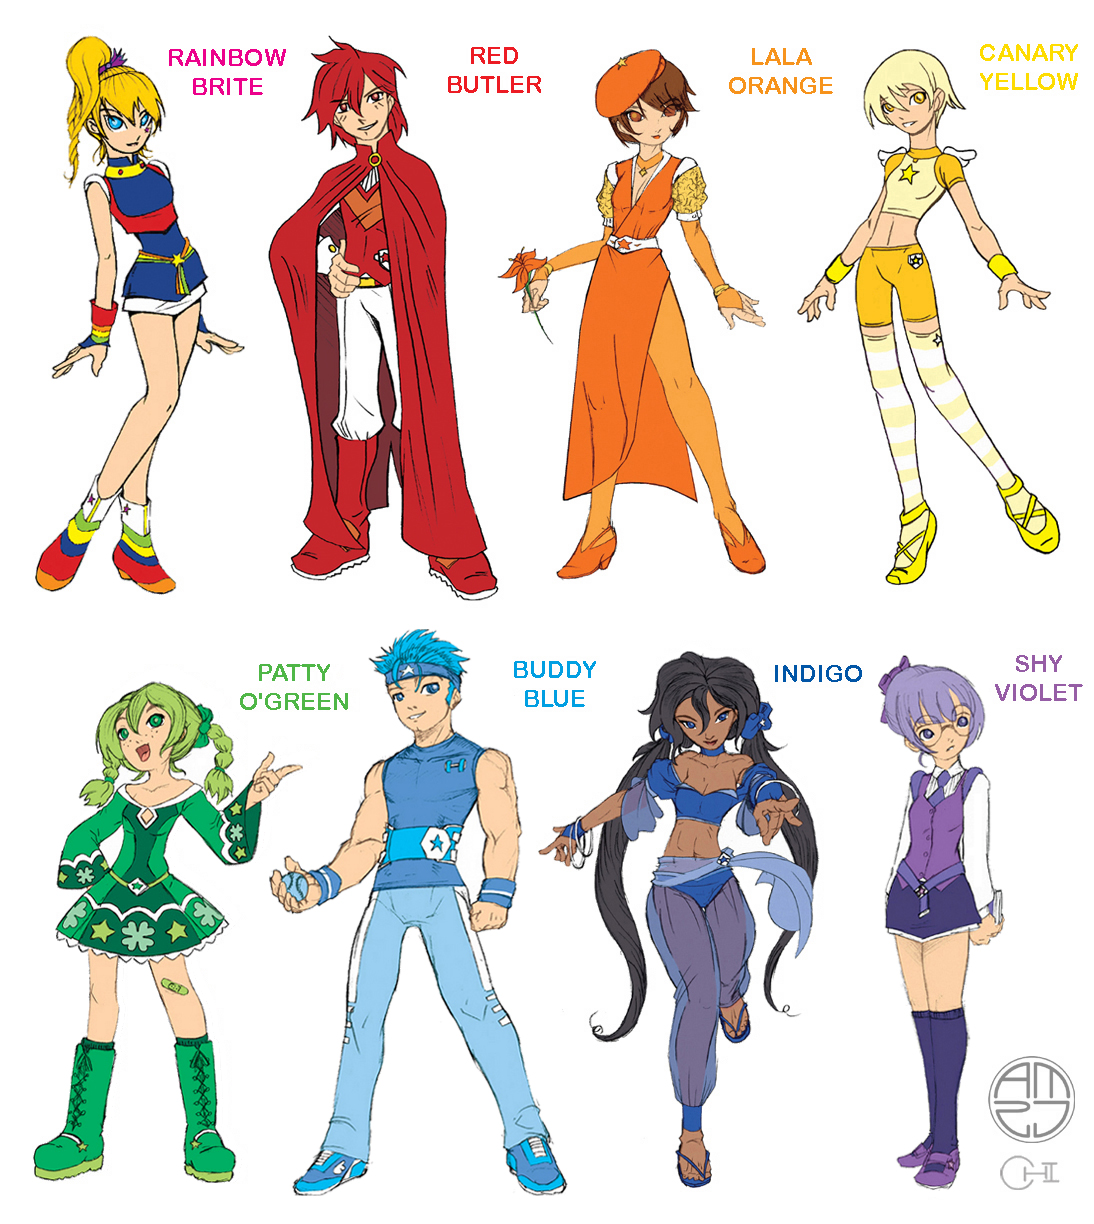 Rainbow Brite and Color Kids by cwmodels on DeviantArt